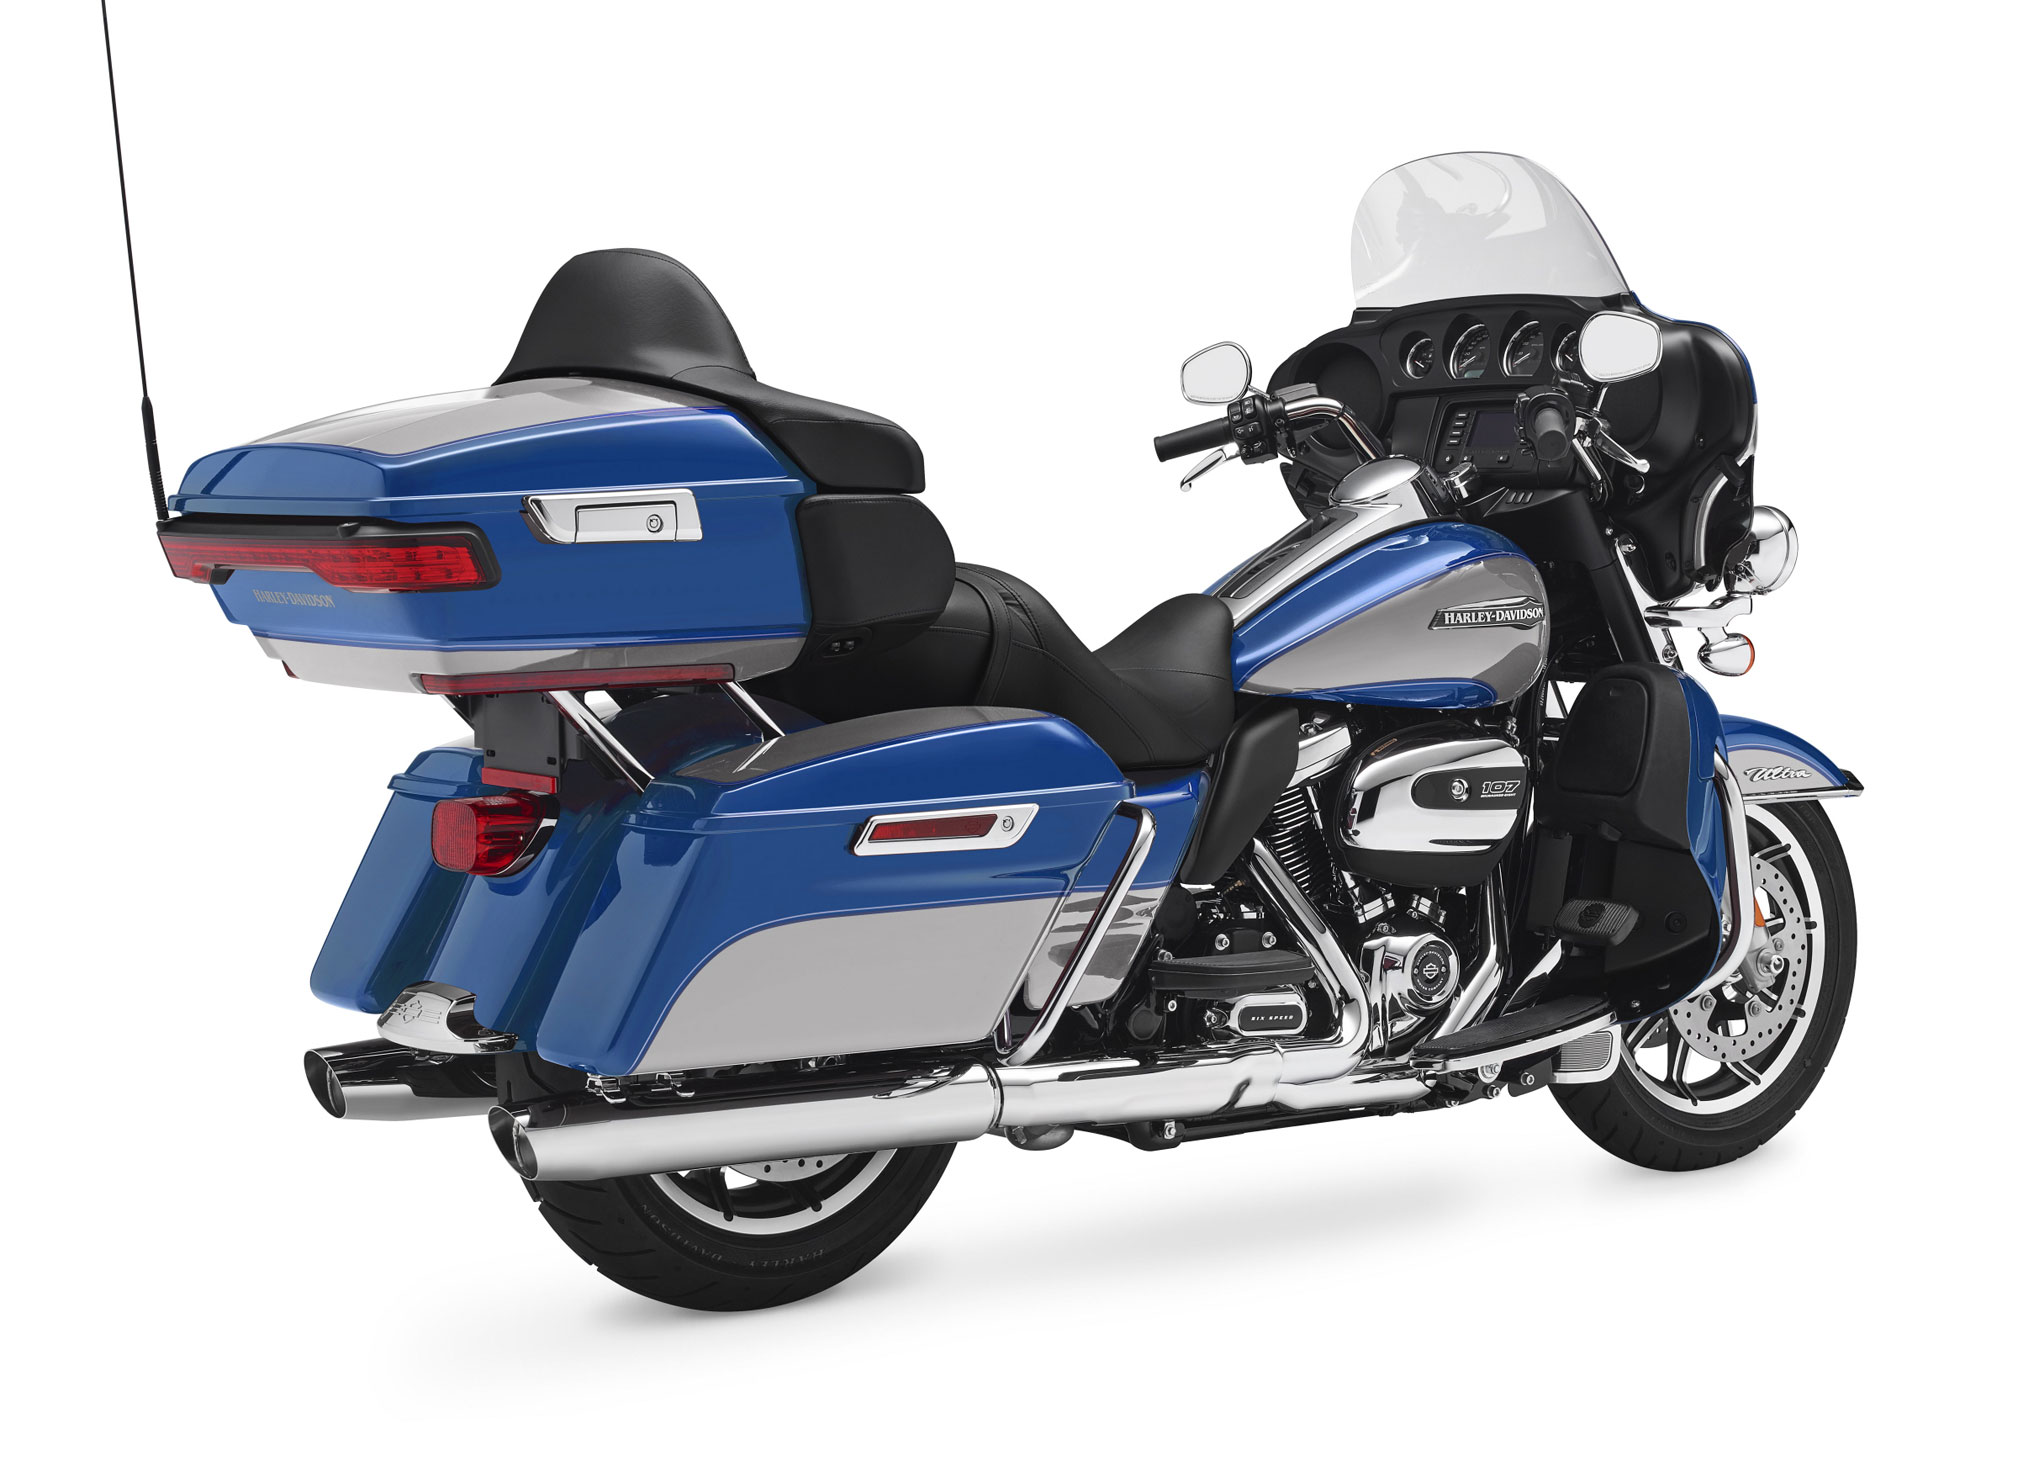 2022 Harley Davidson Electra Glide Ultra Classic Review 